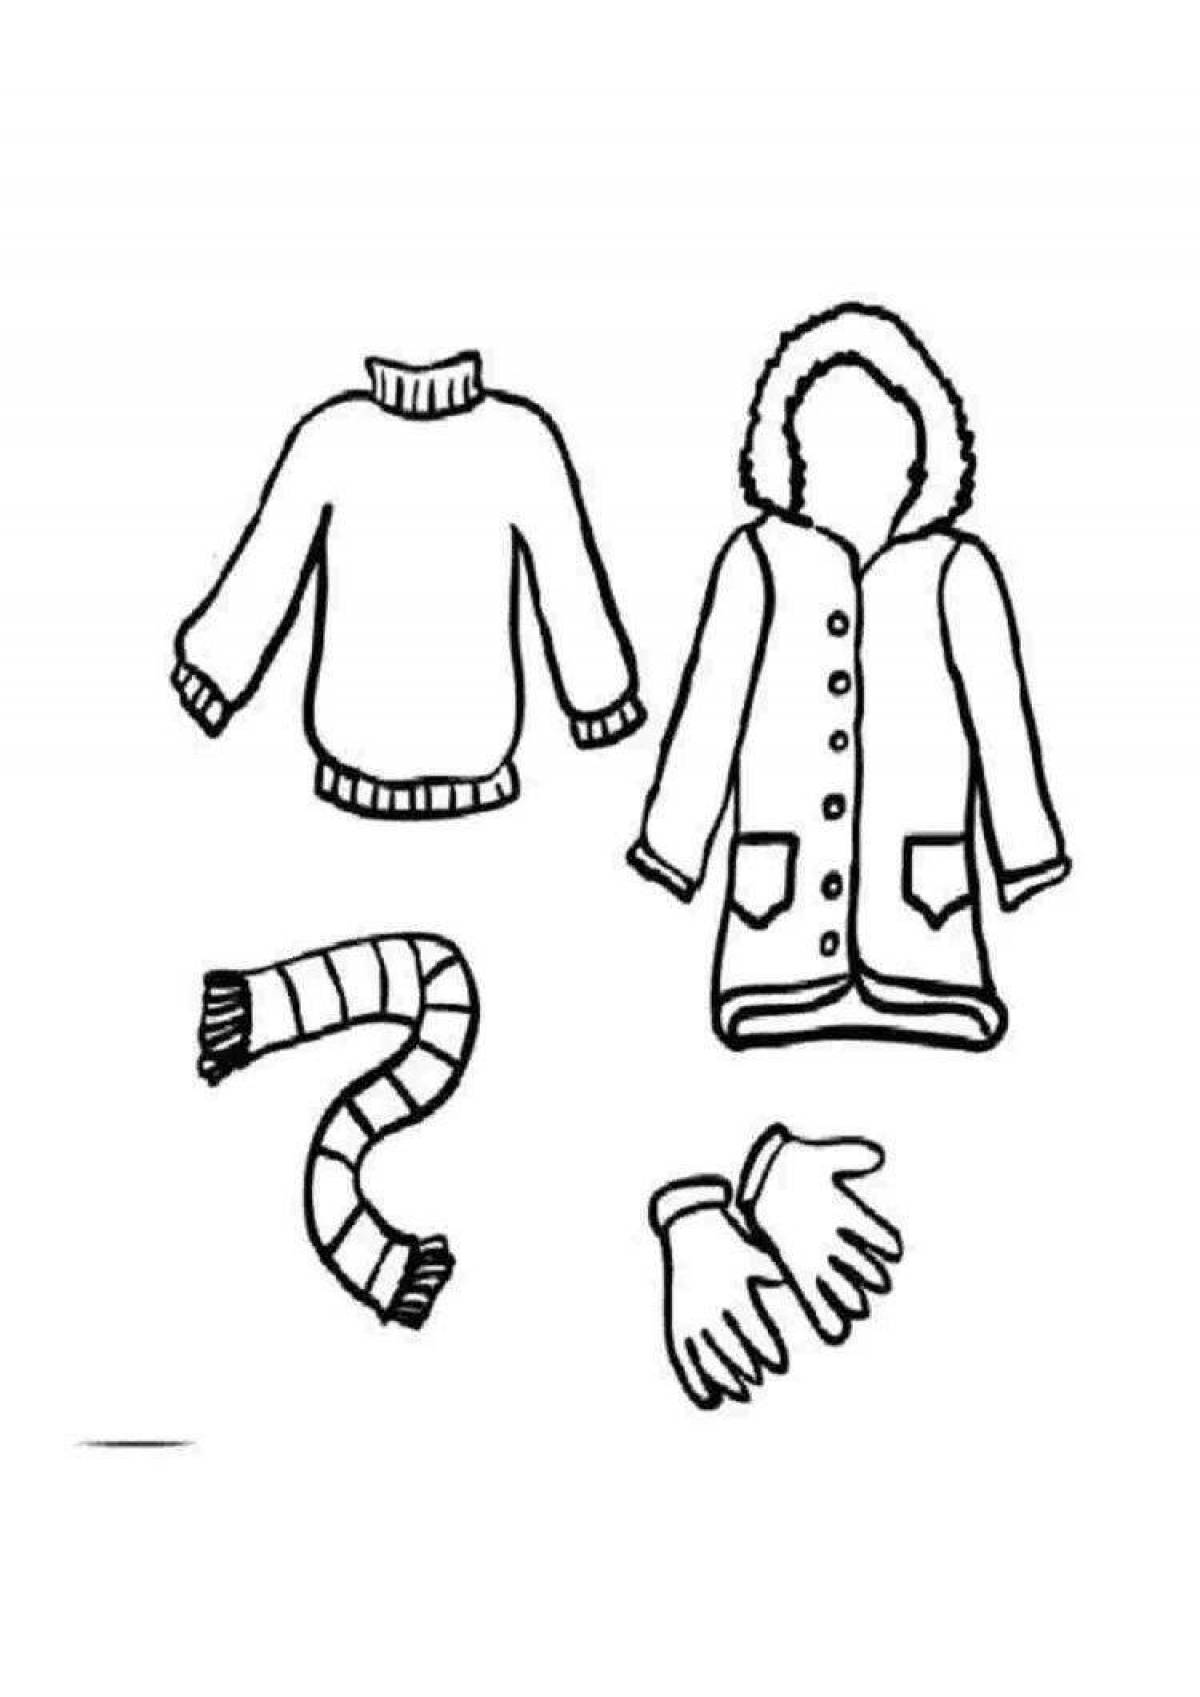 Types of clothing #11